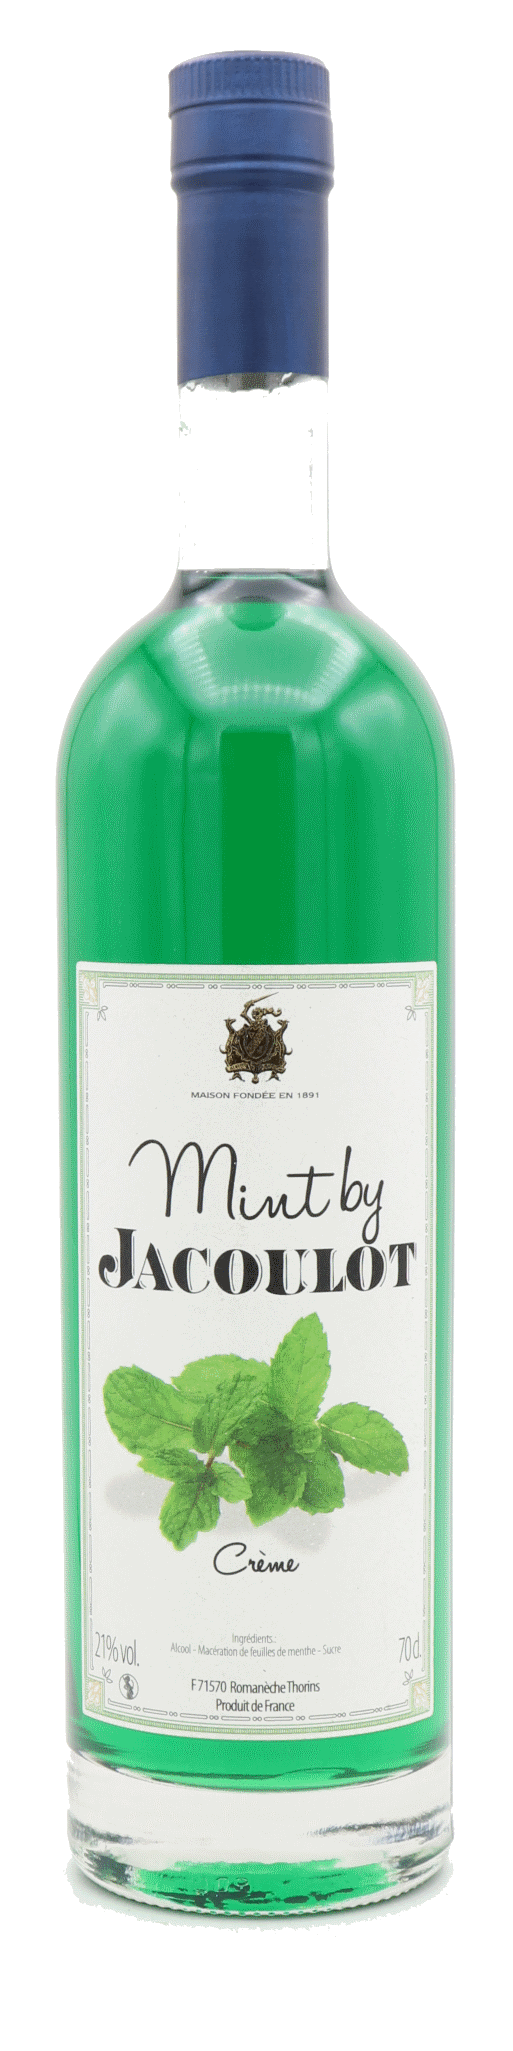 Jacoulot - Mint by Jacoulot